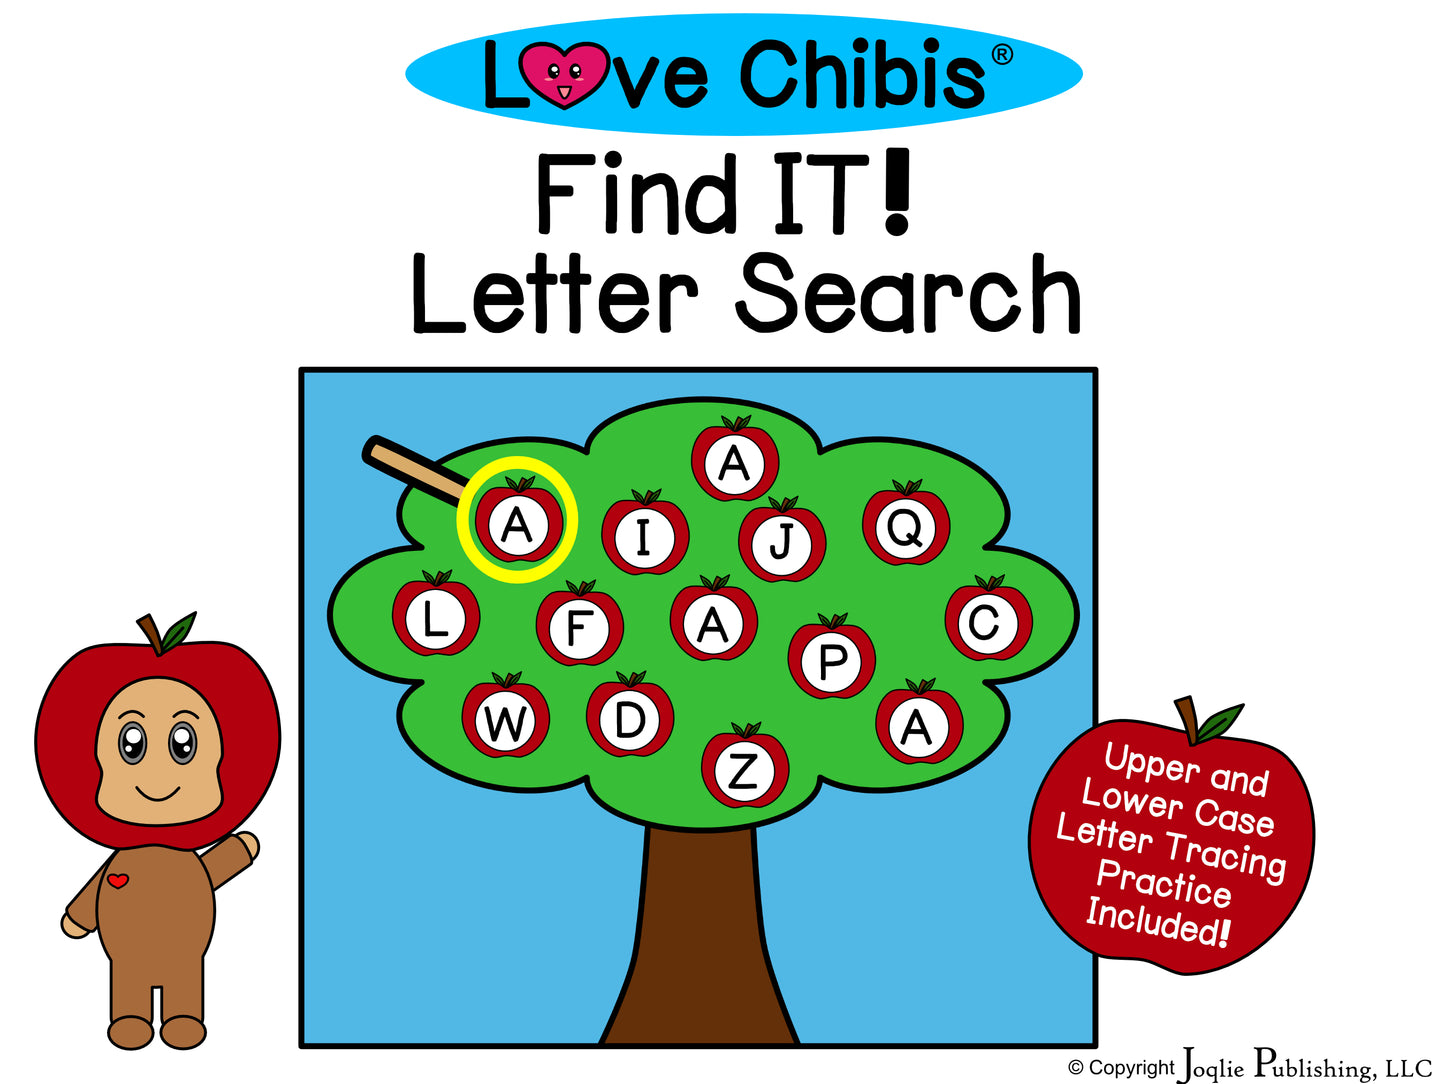 Love Chibis Find IT! Letter Search